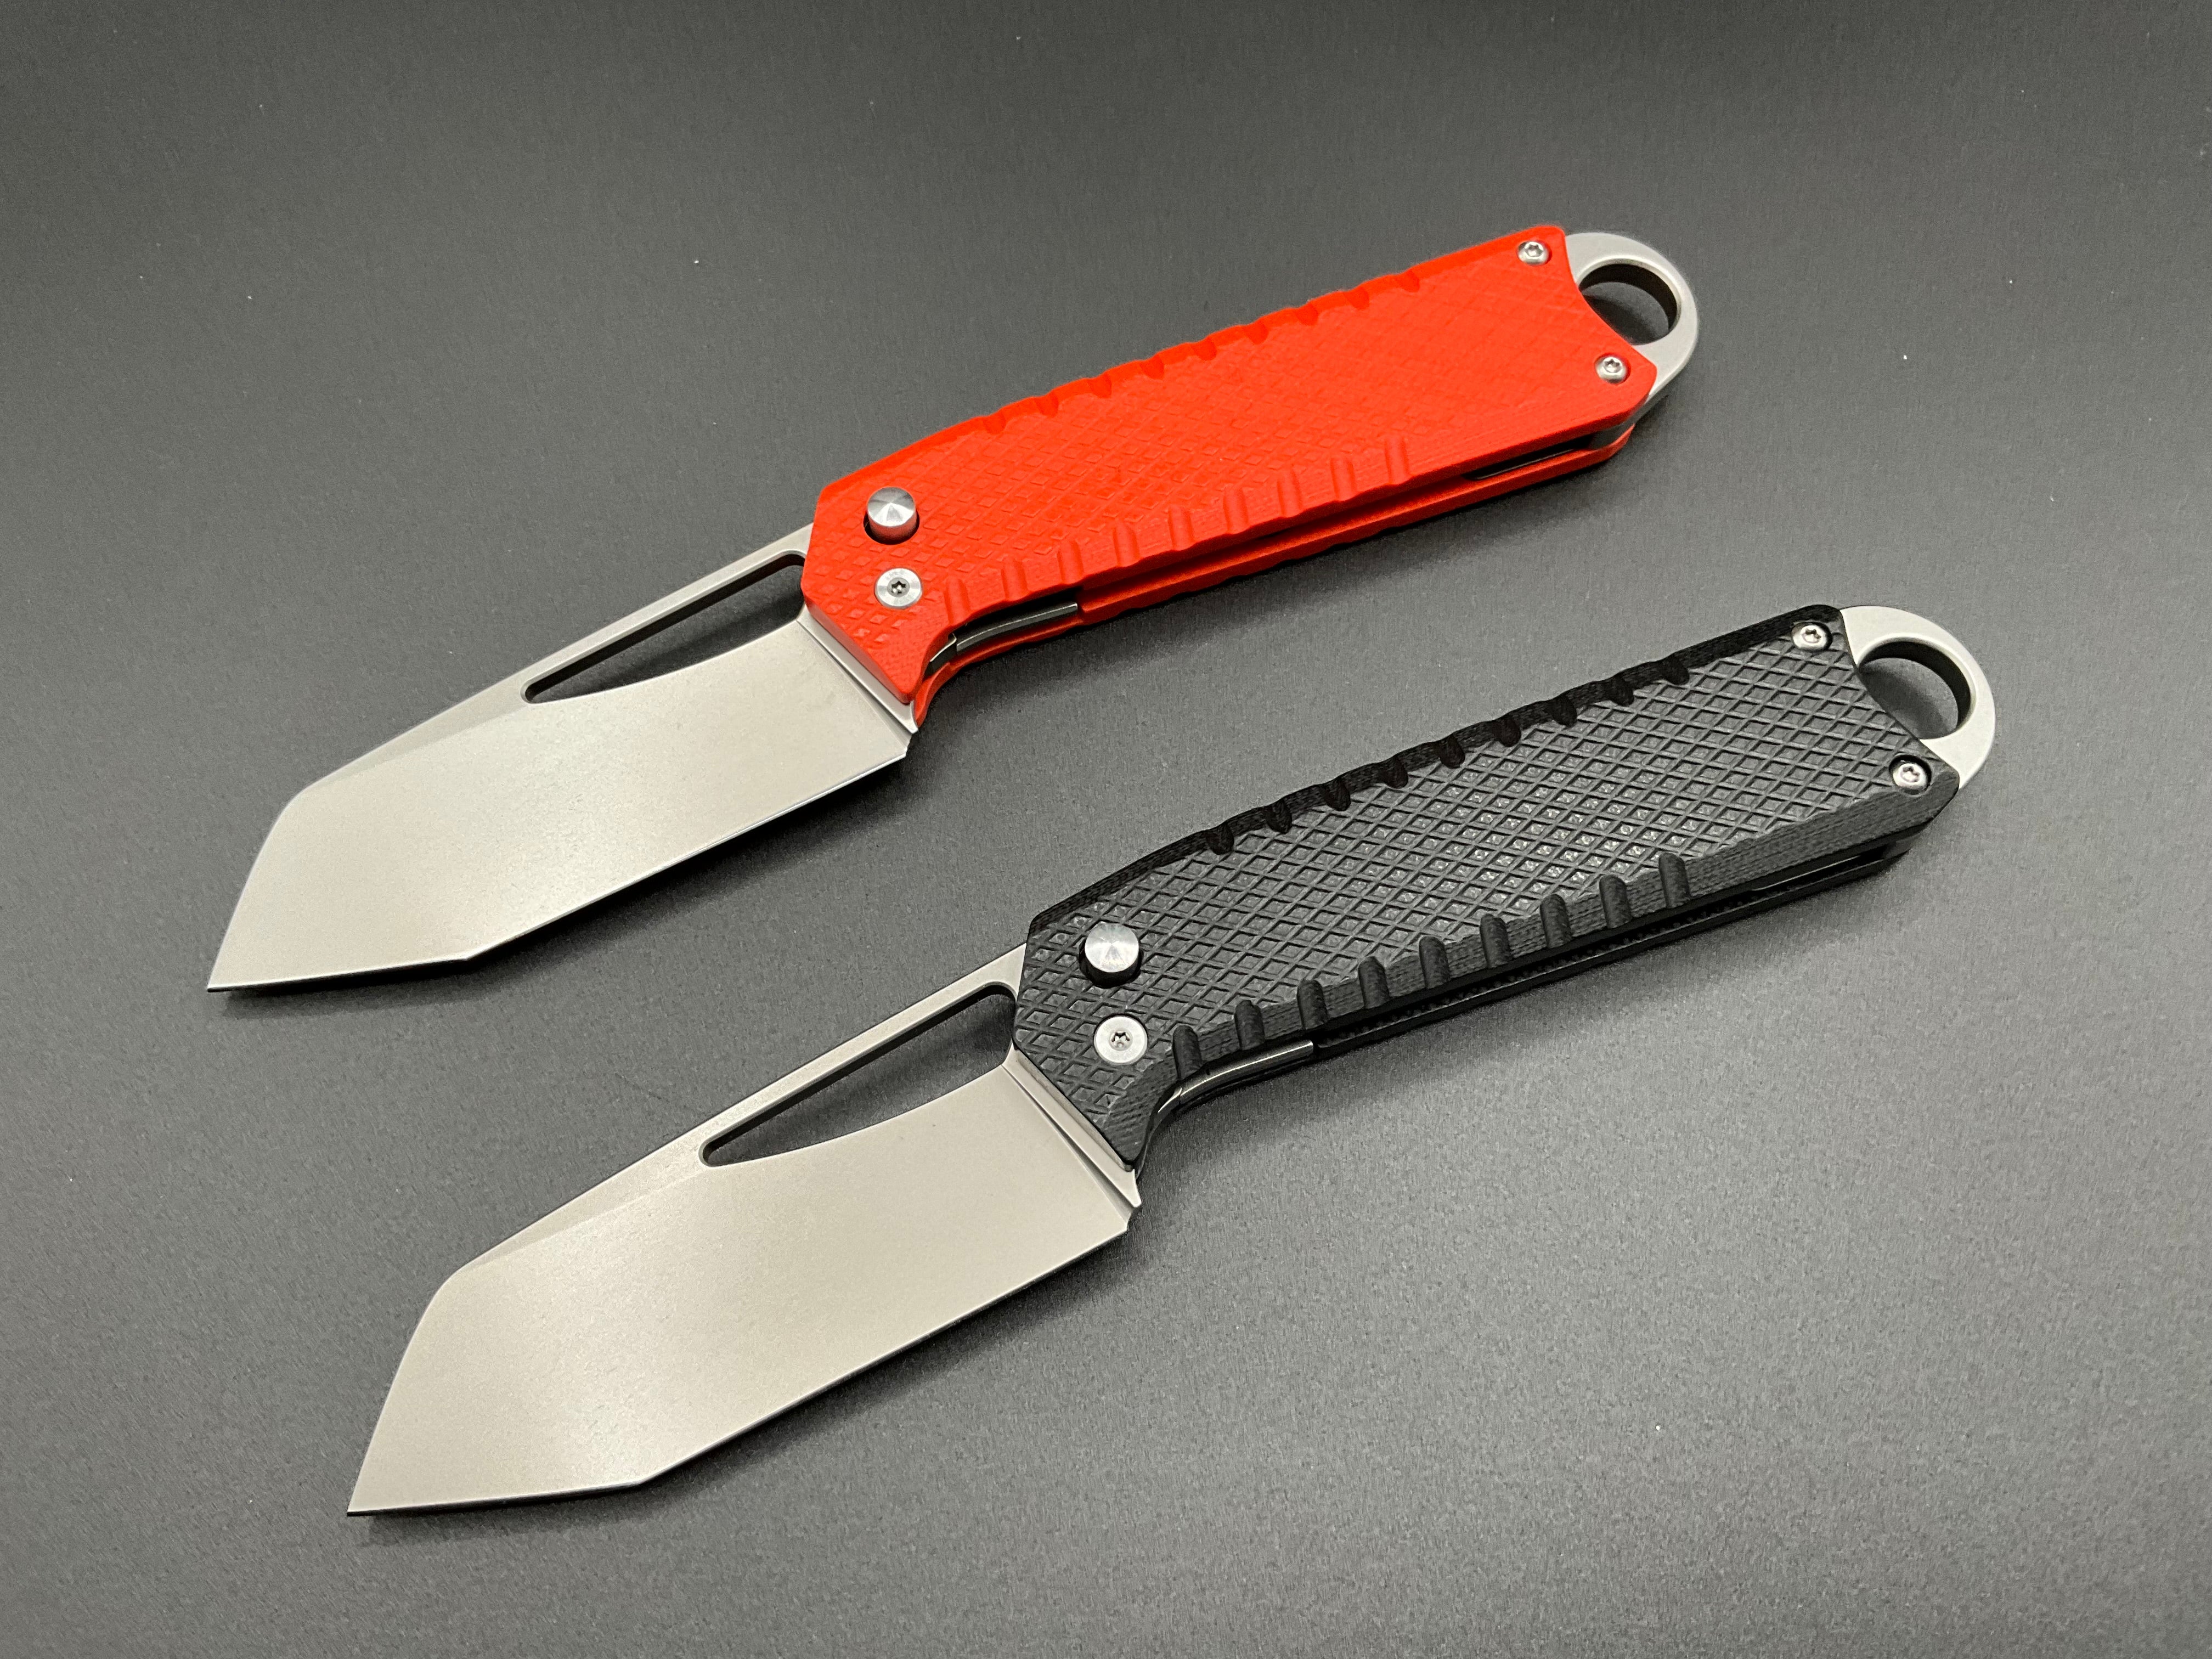 Ketuo USA - Online Store of Rike Knife and Ketuo Knife